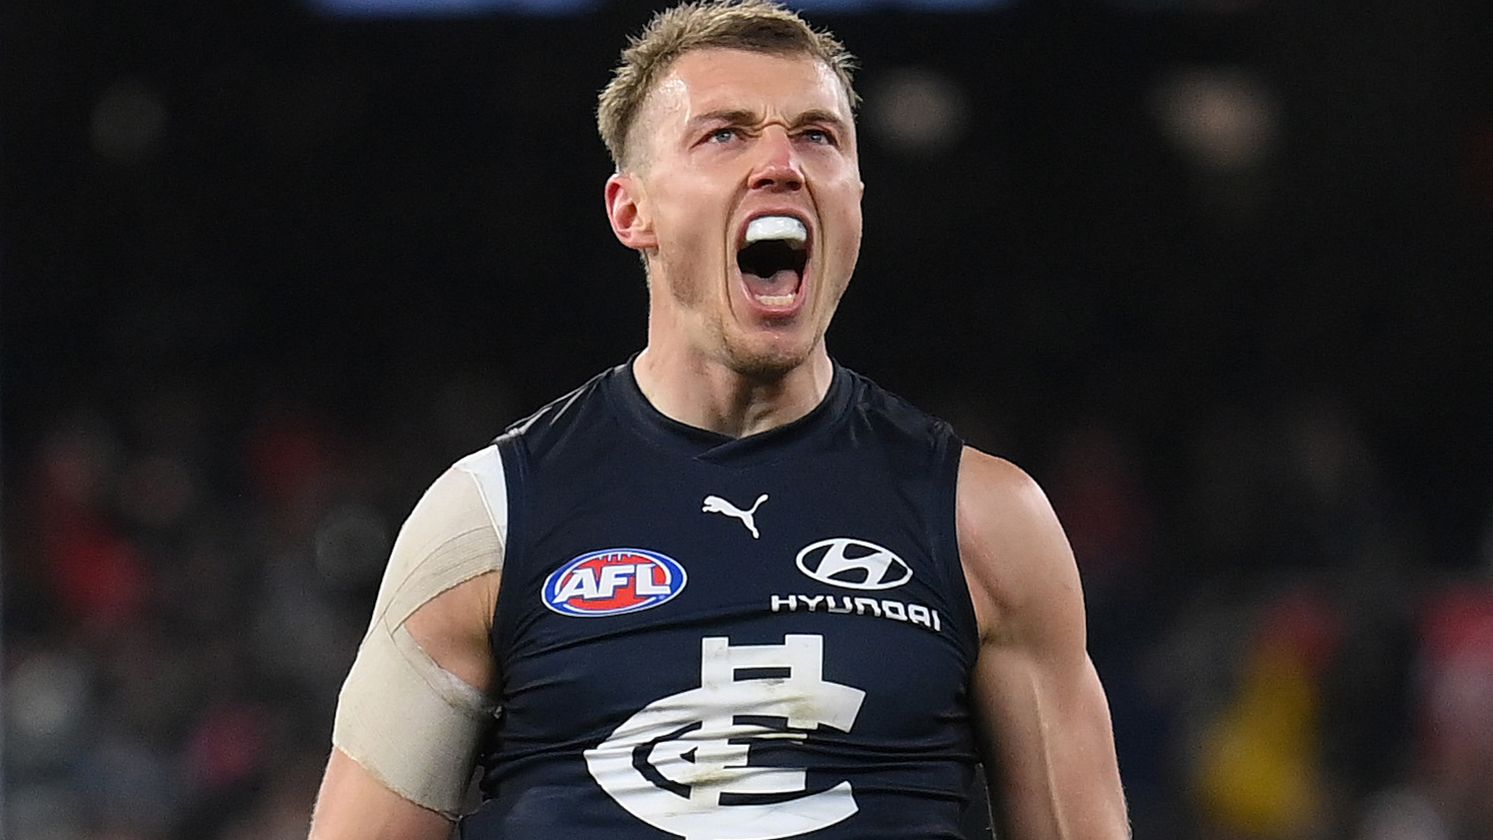 Brownlow Medal Ultimate Guide: How Patrick Cripps' win may provide blueprint for this year's winner